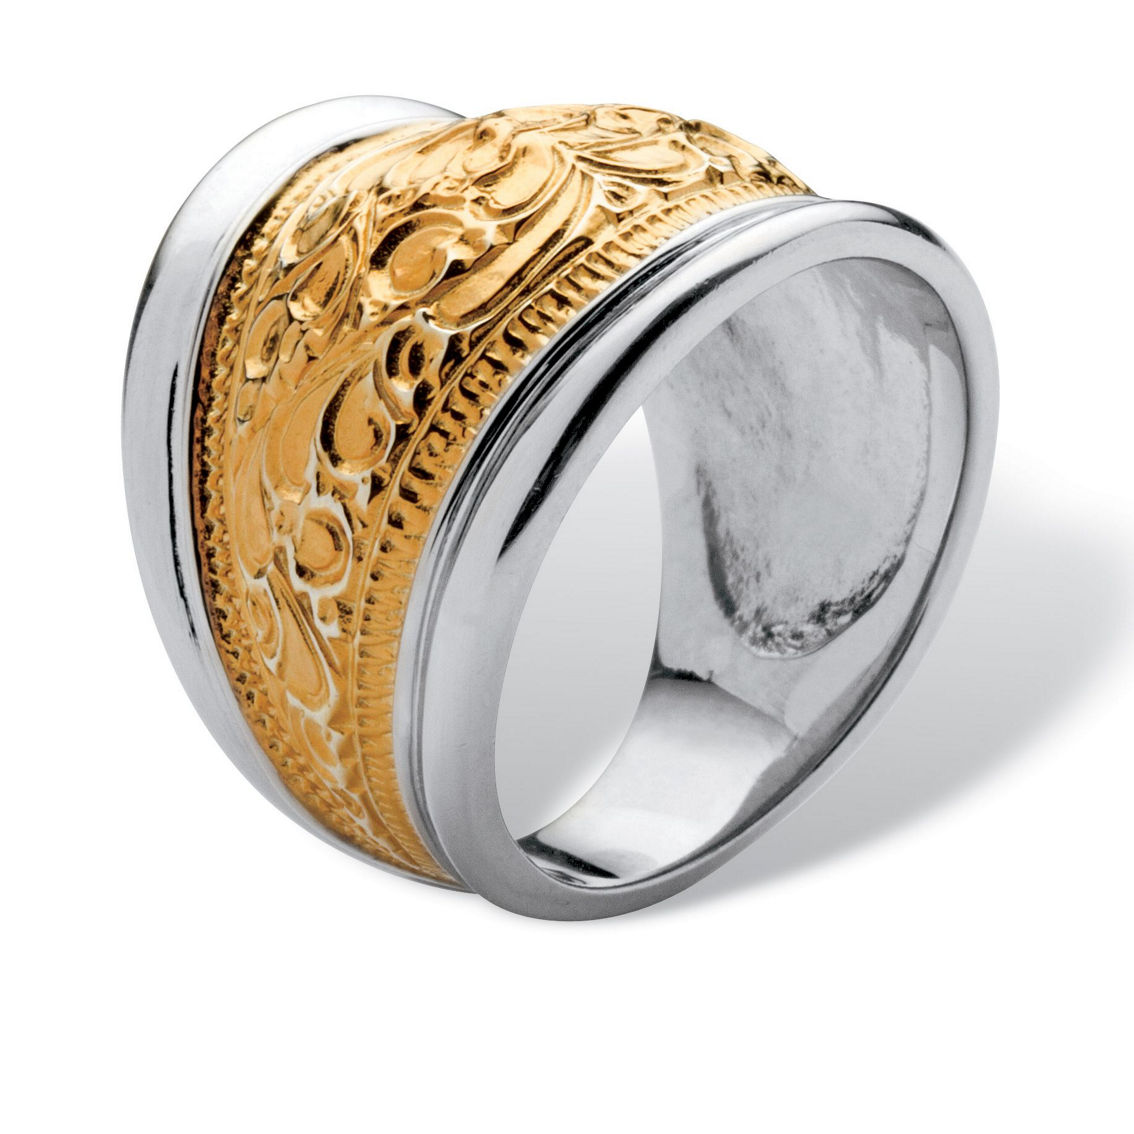 Yellow Gold-Plated Sterling Silver Two-Tone Scroll Motif Cigar Band Ring - Image 2 of 5